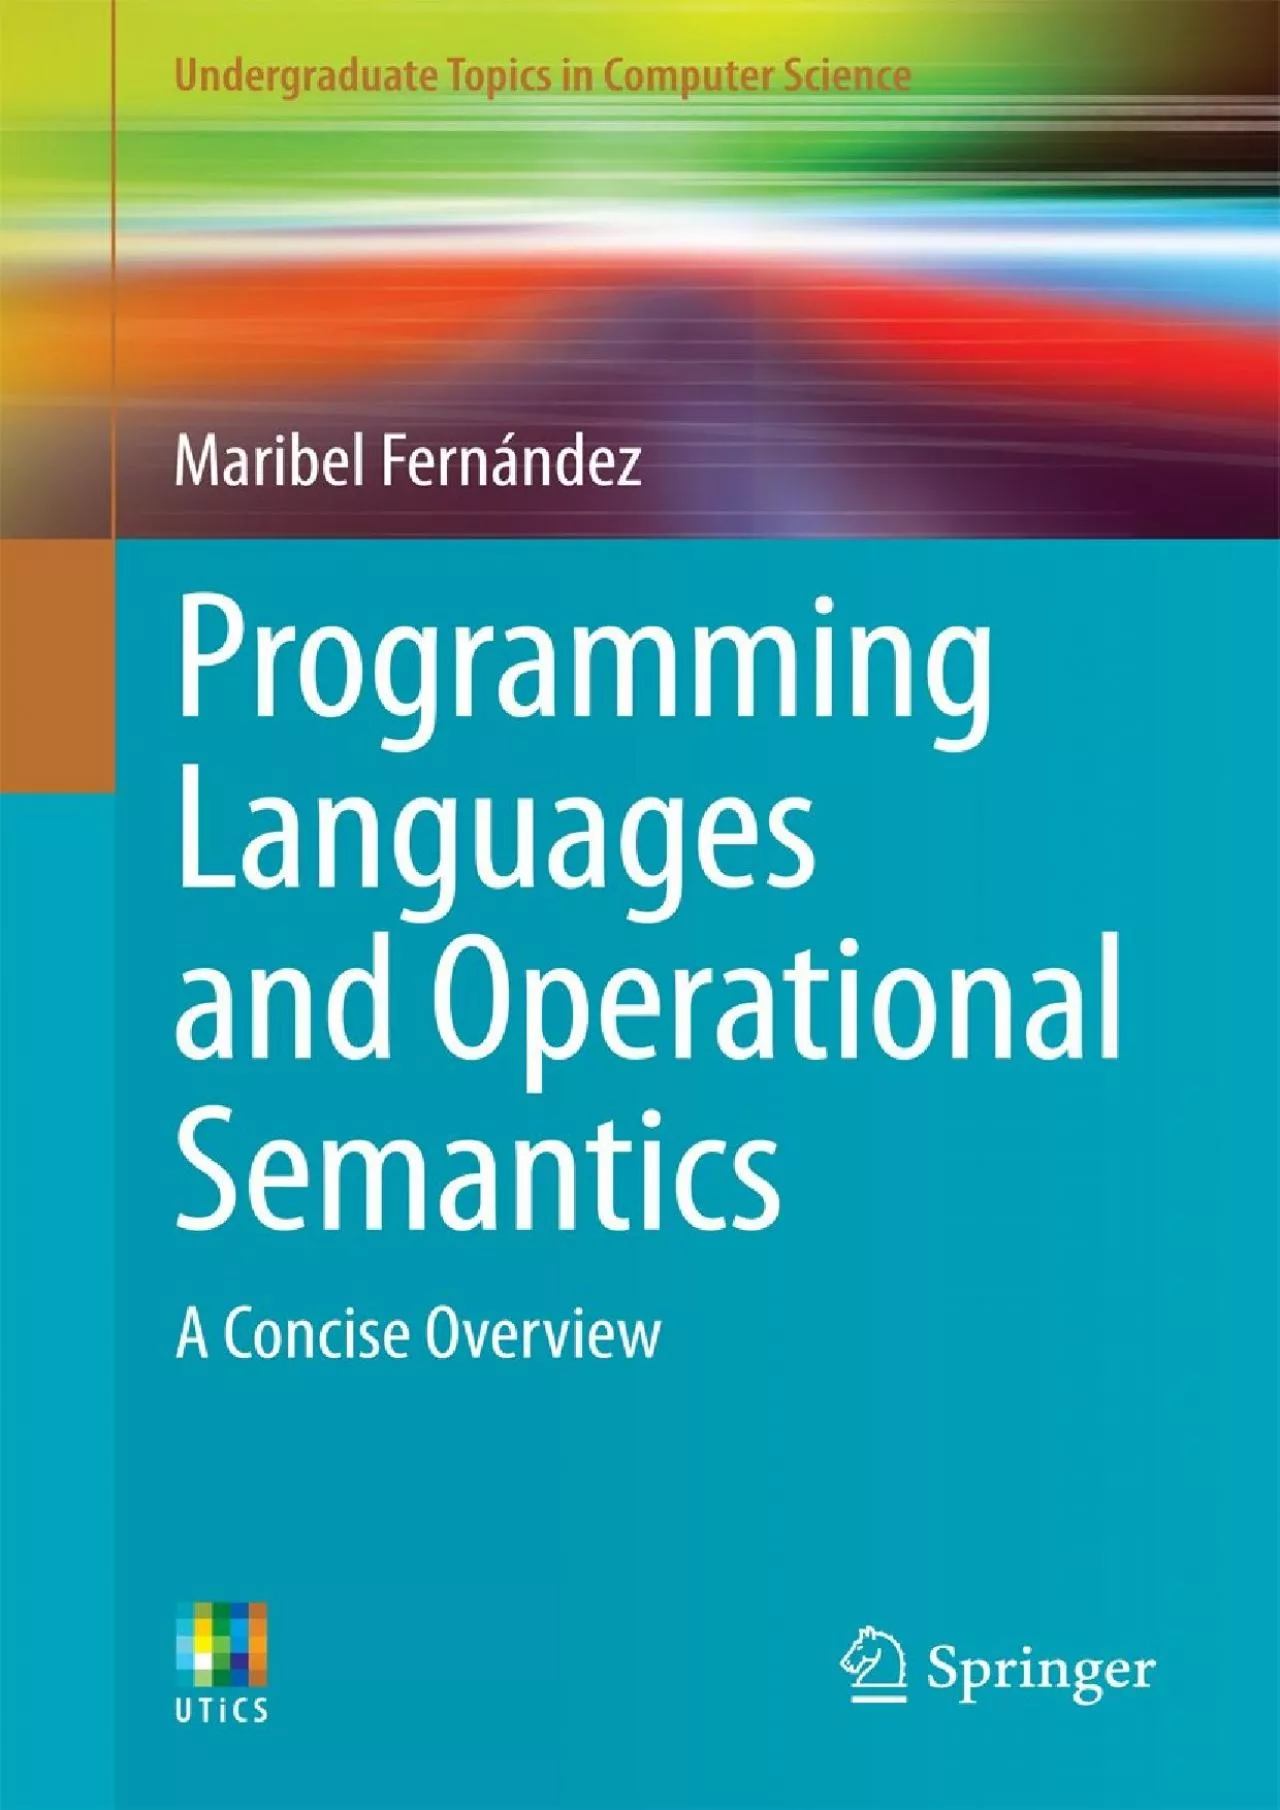 [READ]-Programming Languages and Operational Semantics: A Concise Overview (Undergraduate